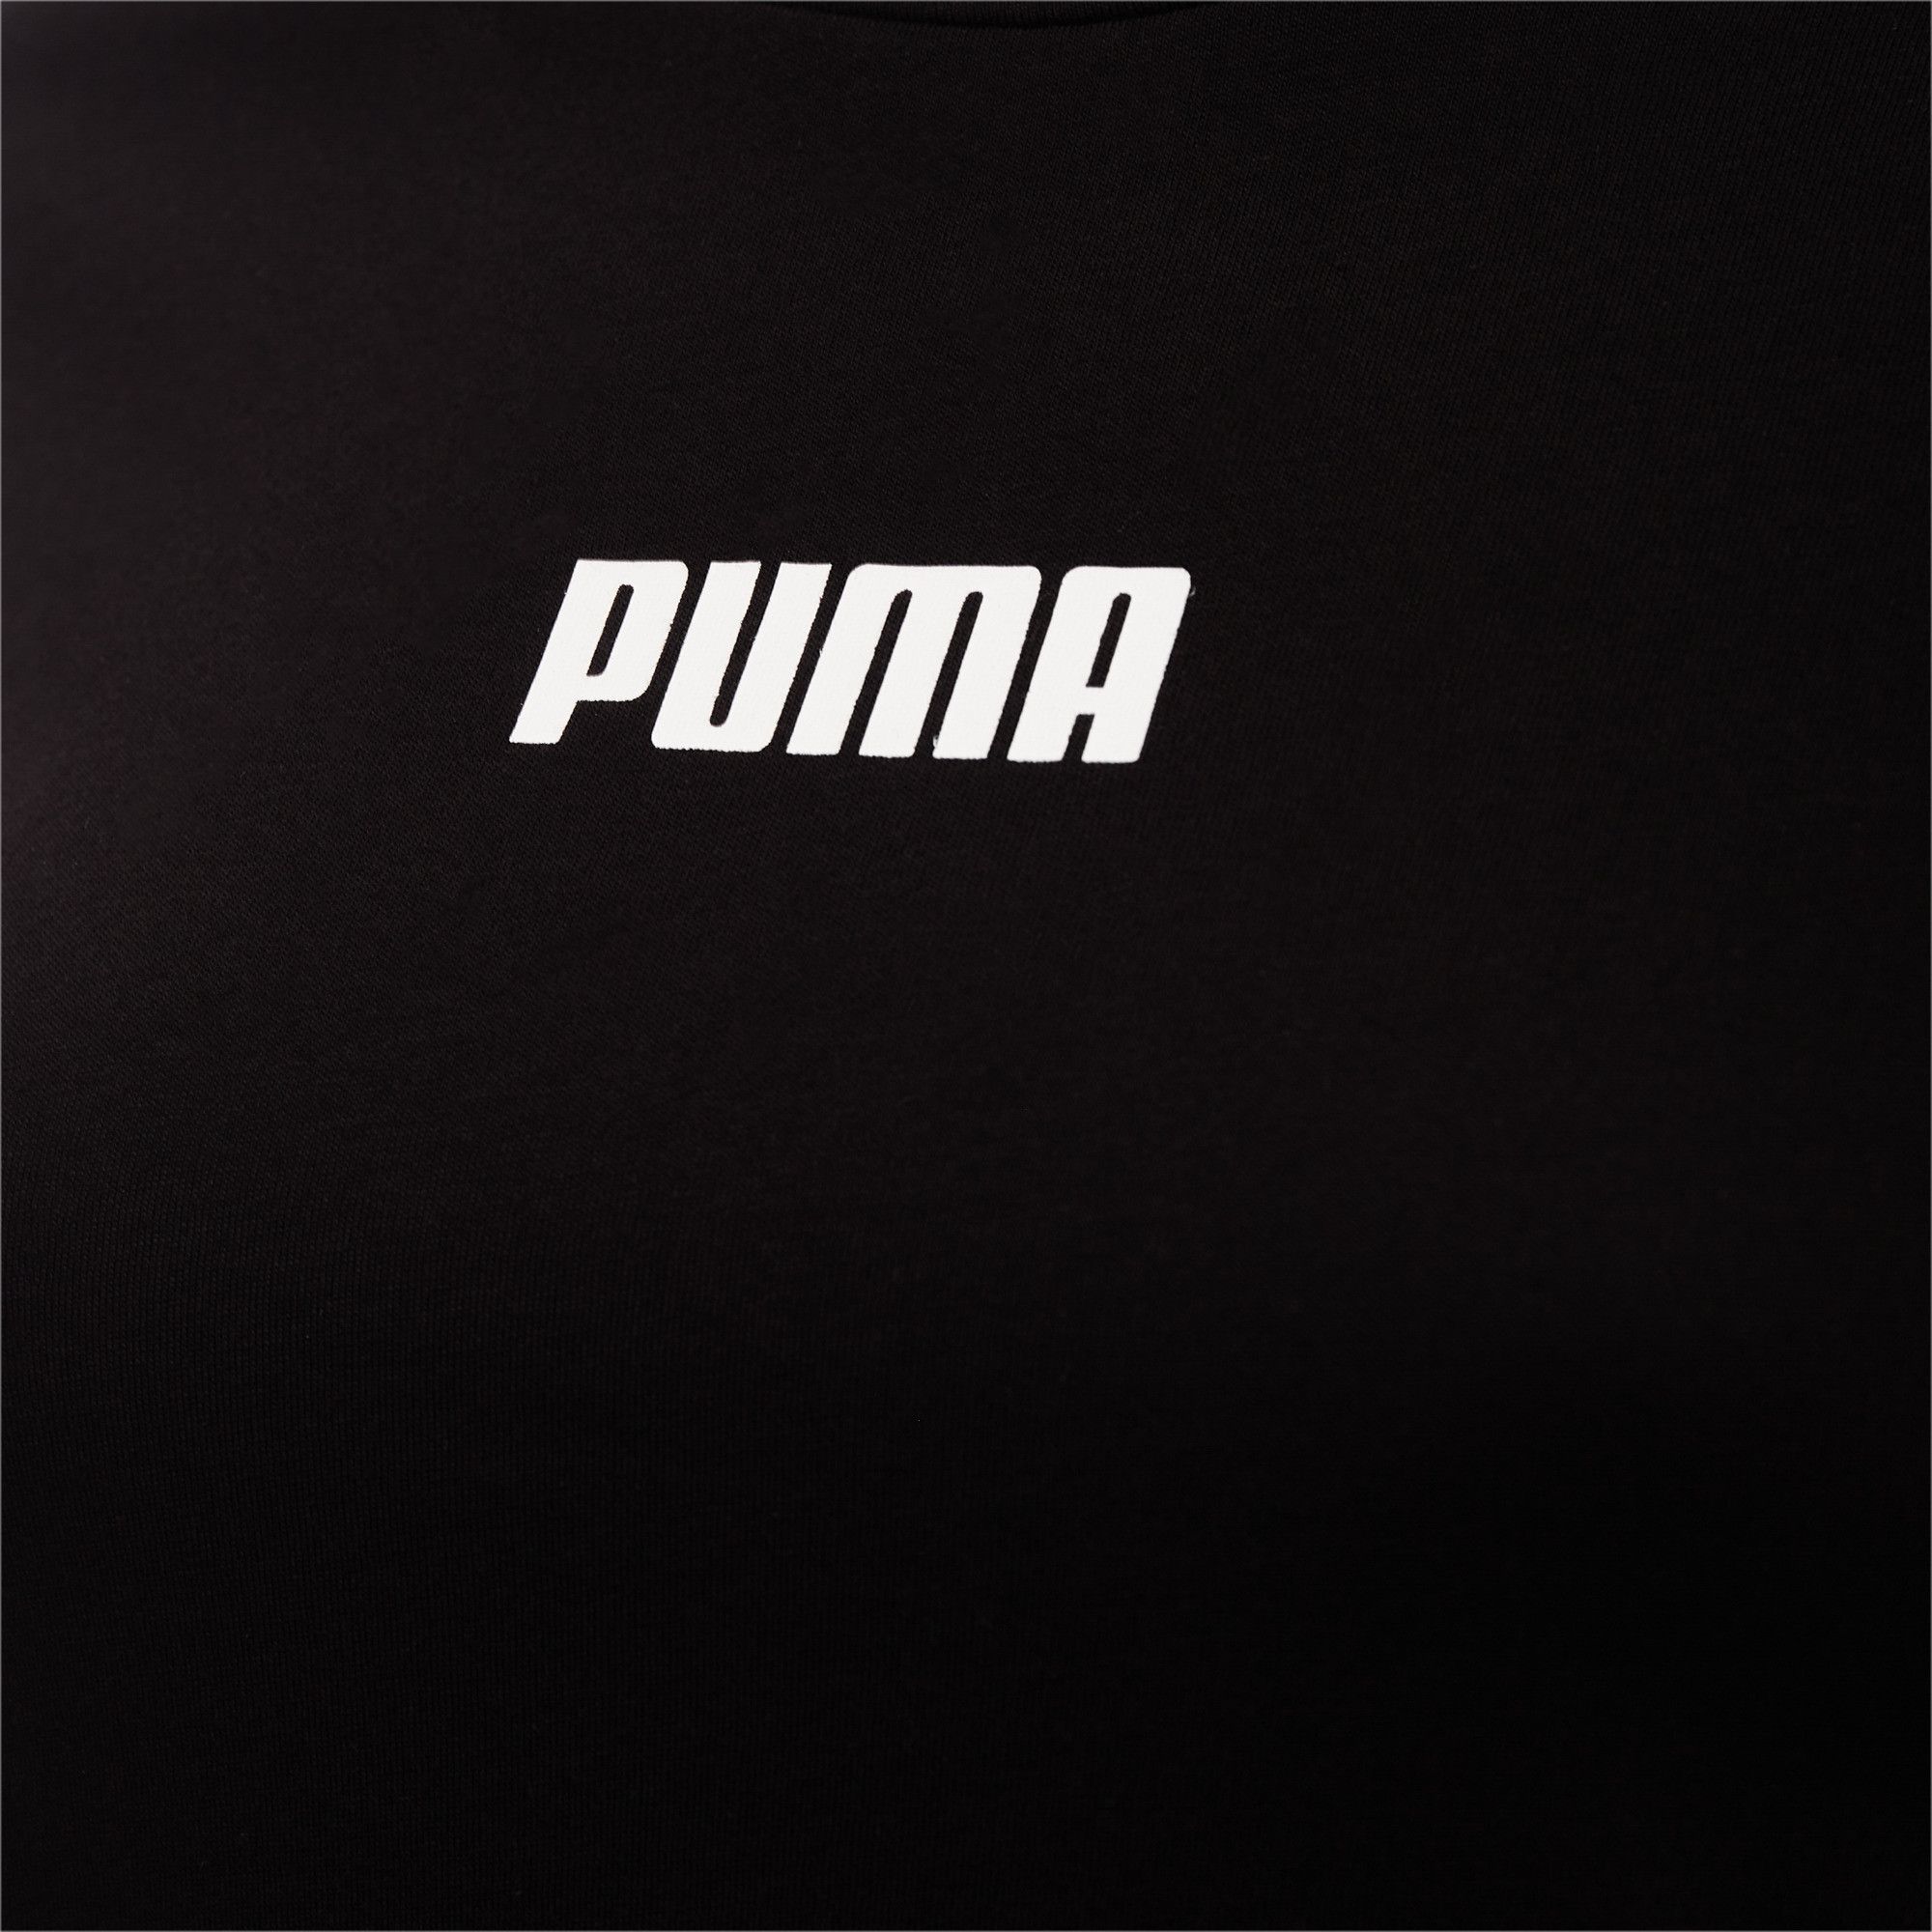 PRODUCT STORY. Athletic PUMA DNA meets comfy, casual style. Throw on the Tape Tee and conquer the day.DETAILS.Regular fit.Crew neck.PUMA branding details.